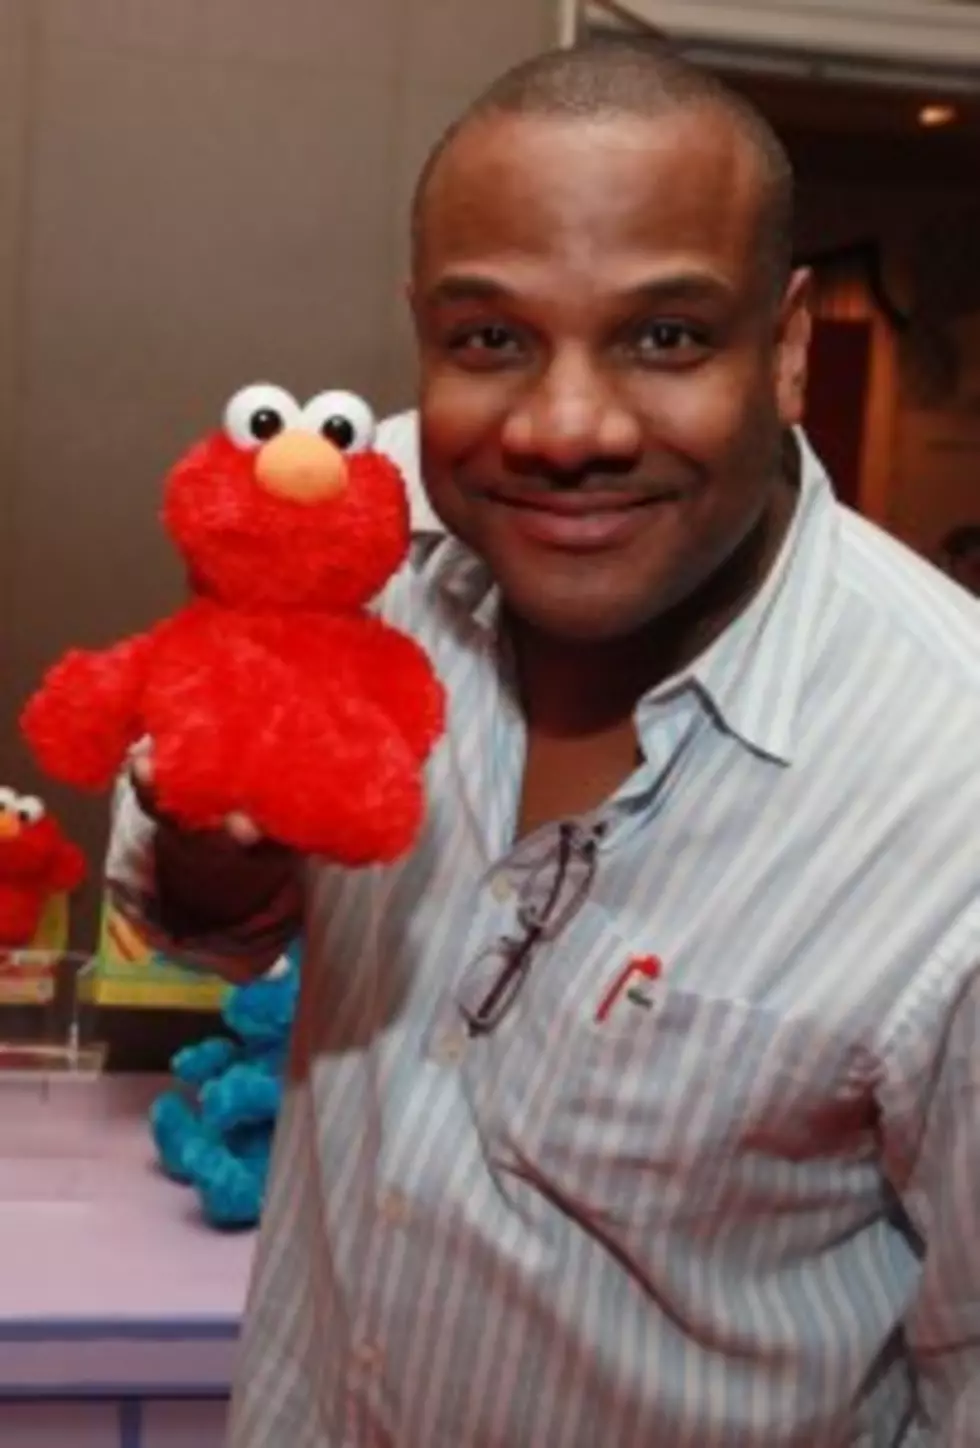 &#8216;Being Elmo: A Puppeteer&#8217;s Journey&#8217; An Inspirational Documentary [VIDEO]